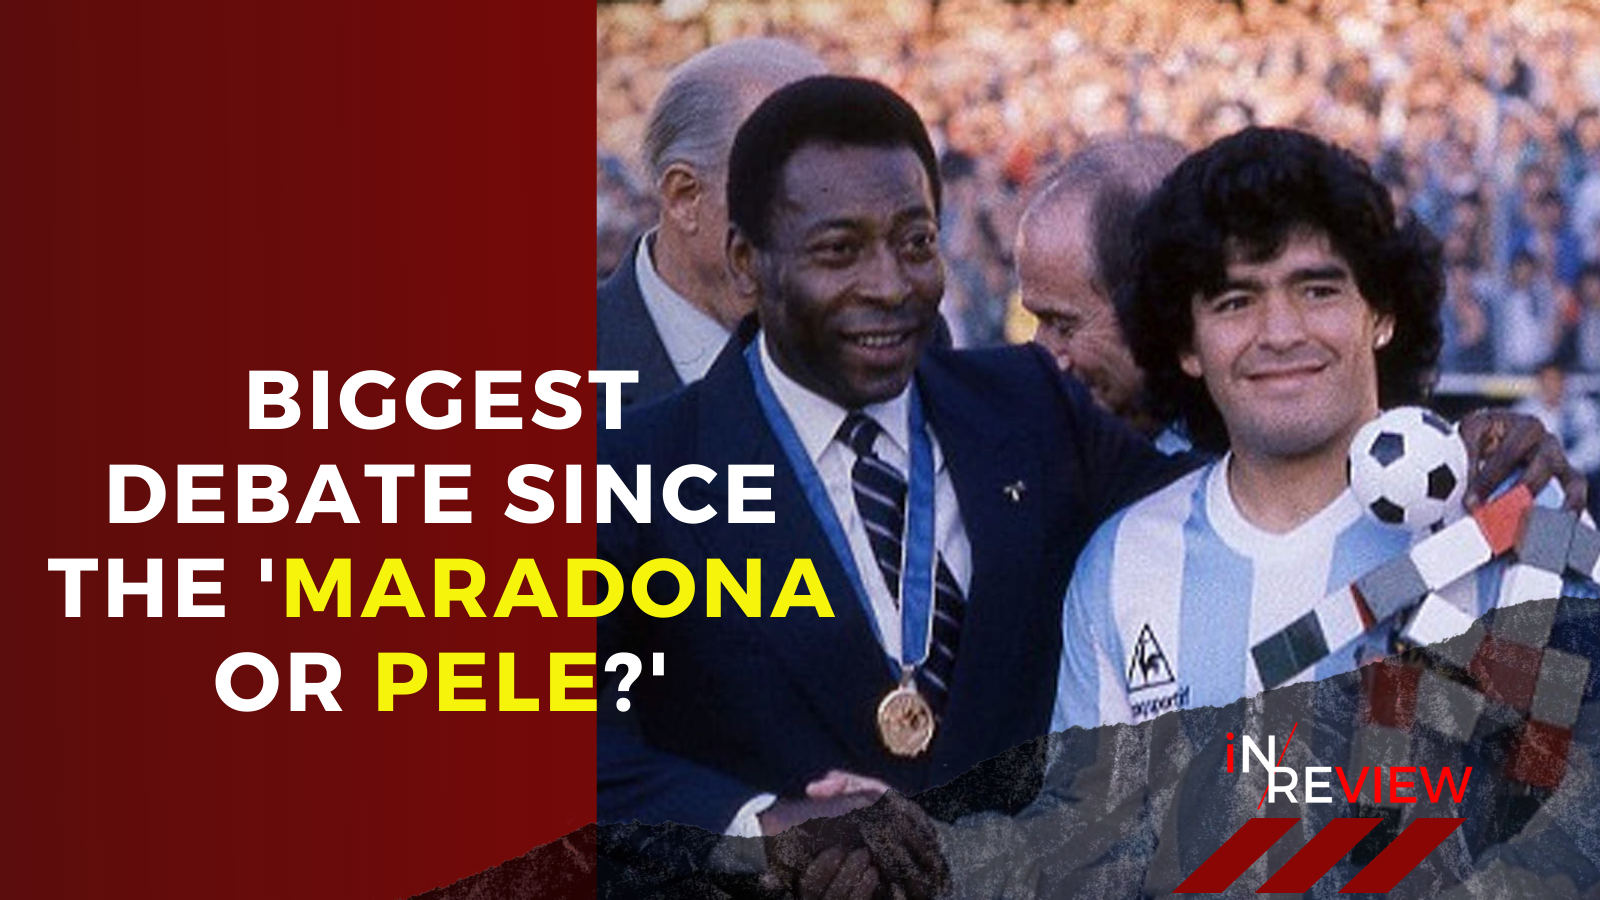 maradona and pele - WTX News Breaking News, fashion & Culture from around the World - Daily News Briefings -Finance, Business, Politics & Sports